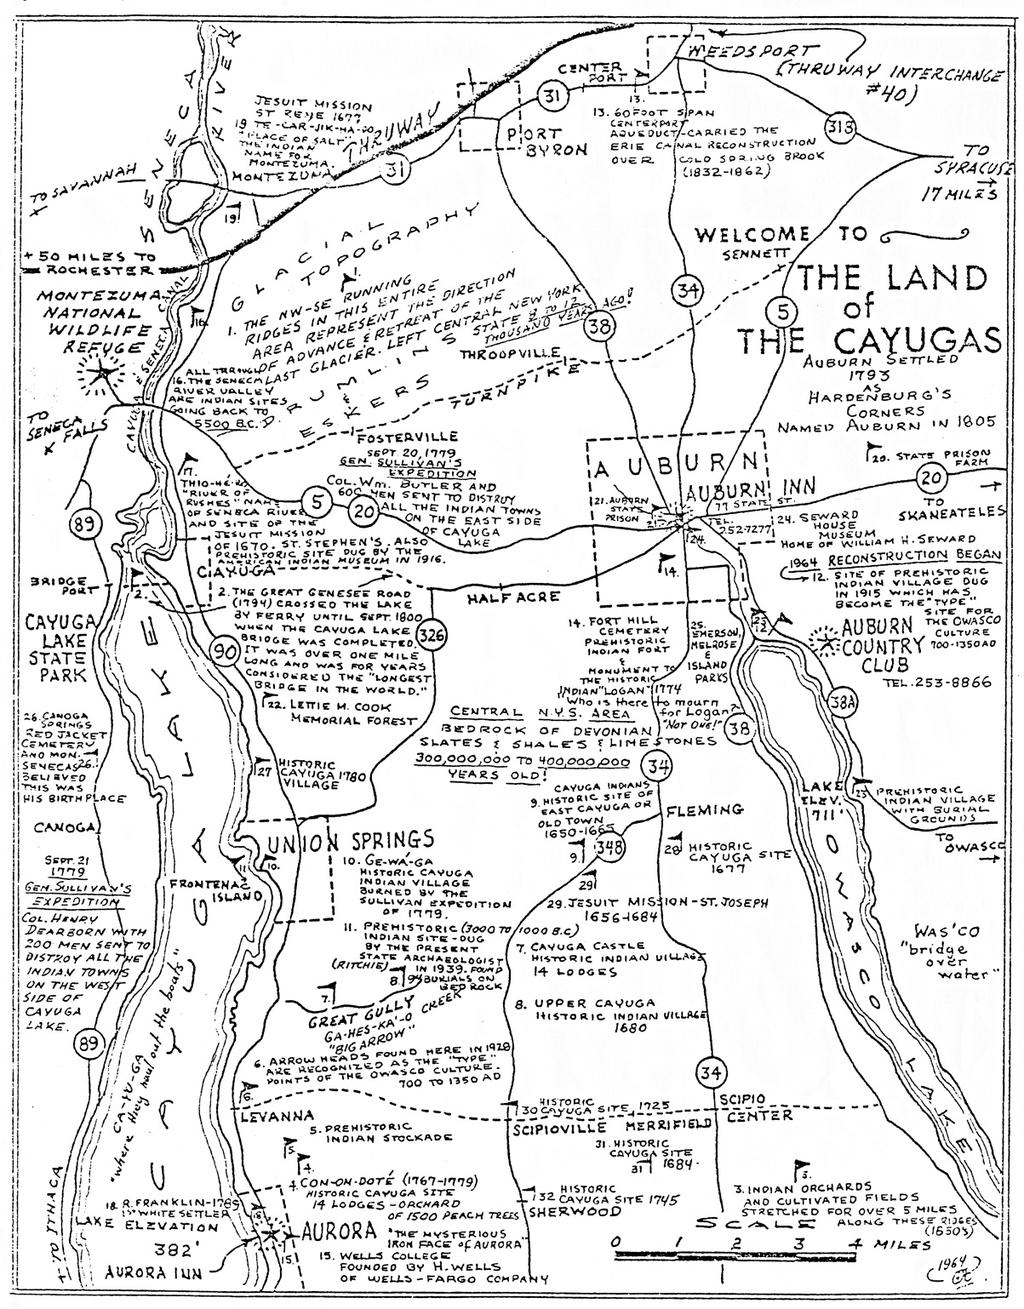 Land of the Cayugas map created in 1964 showing locations of some Haudenoshaunee villages, sites and orchards in the vicinity of the Town of